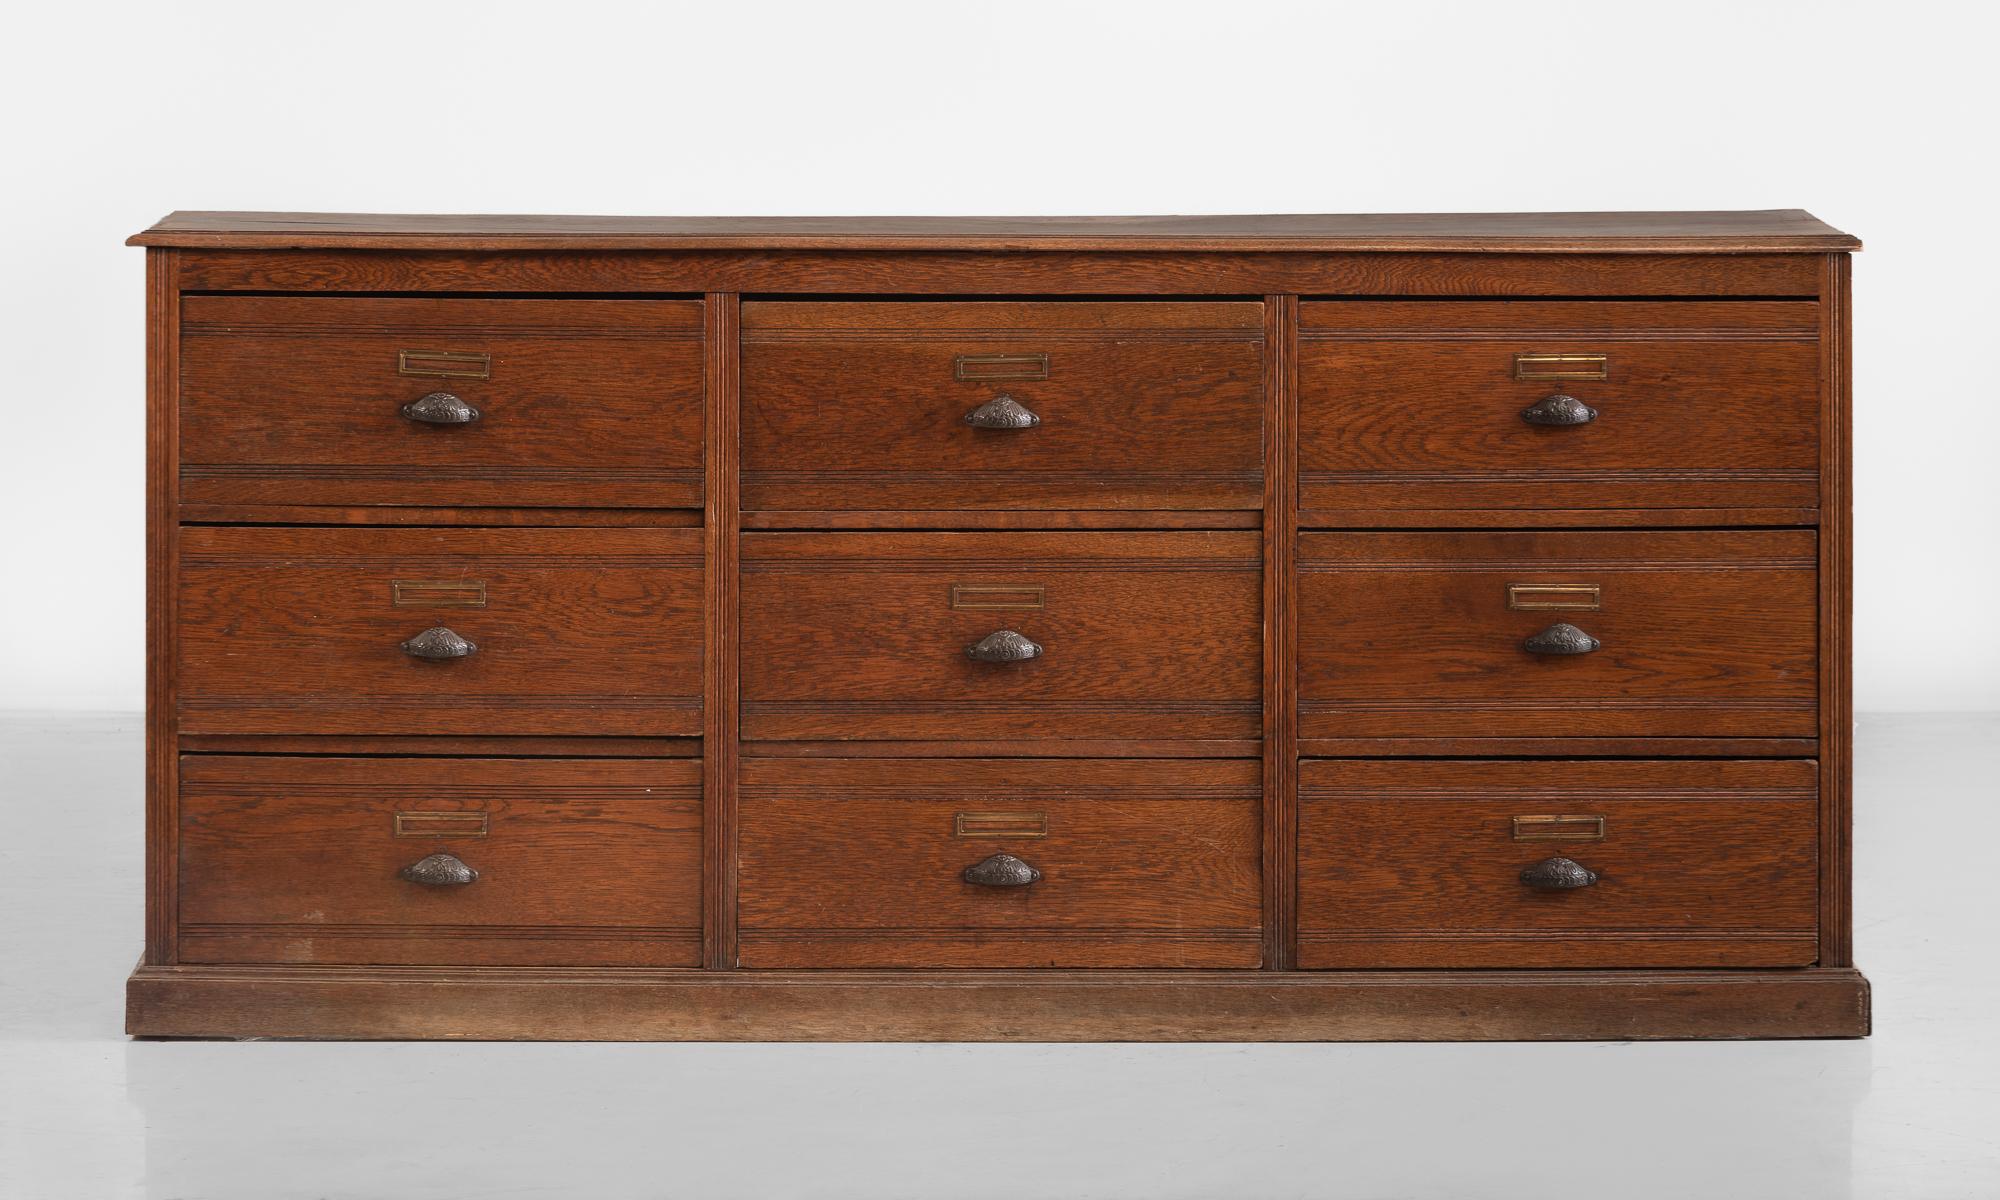 Oak chest of drawers, circa 1920

Beautifully constructed chest of oak with brass hardware.